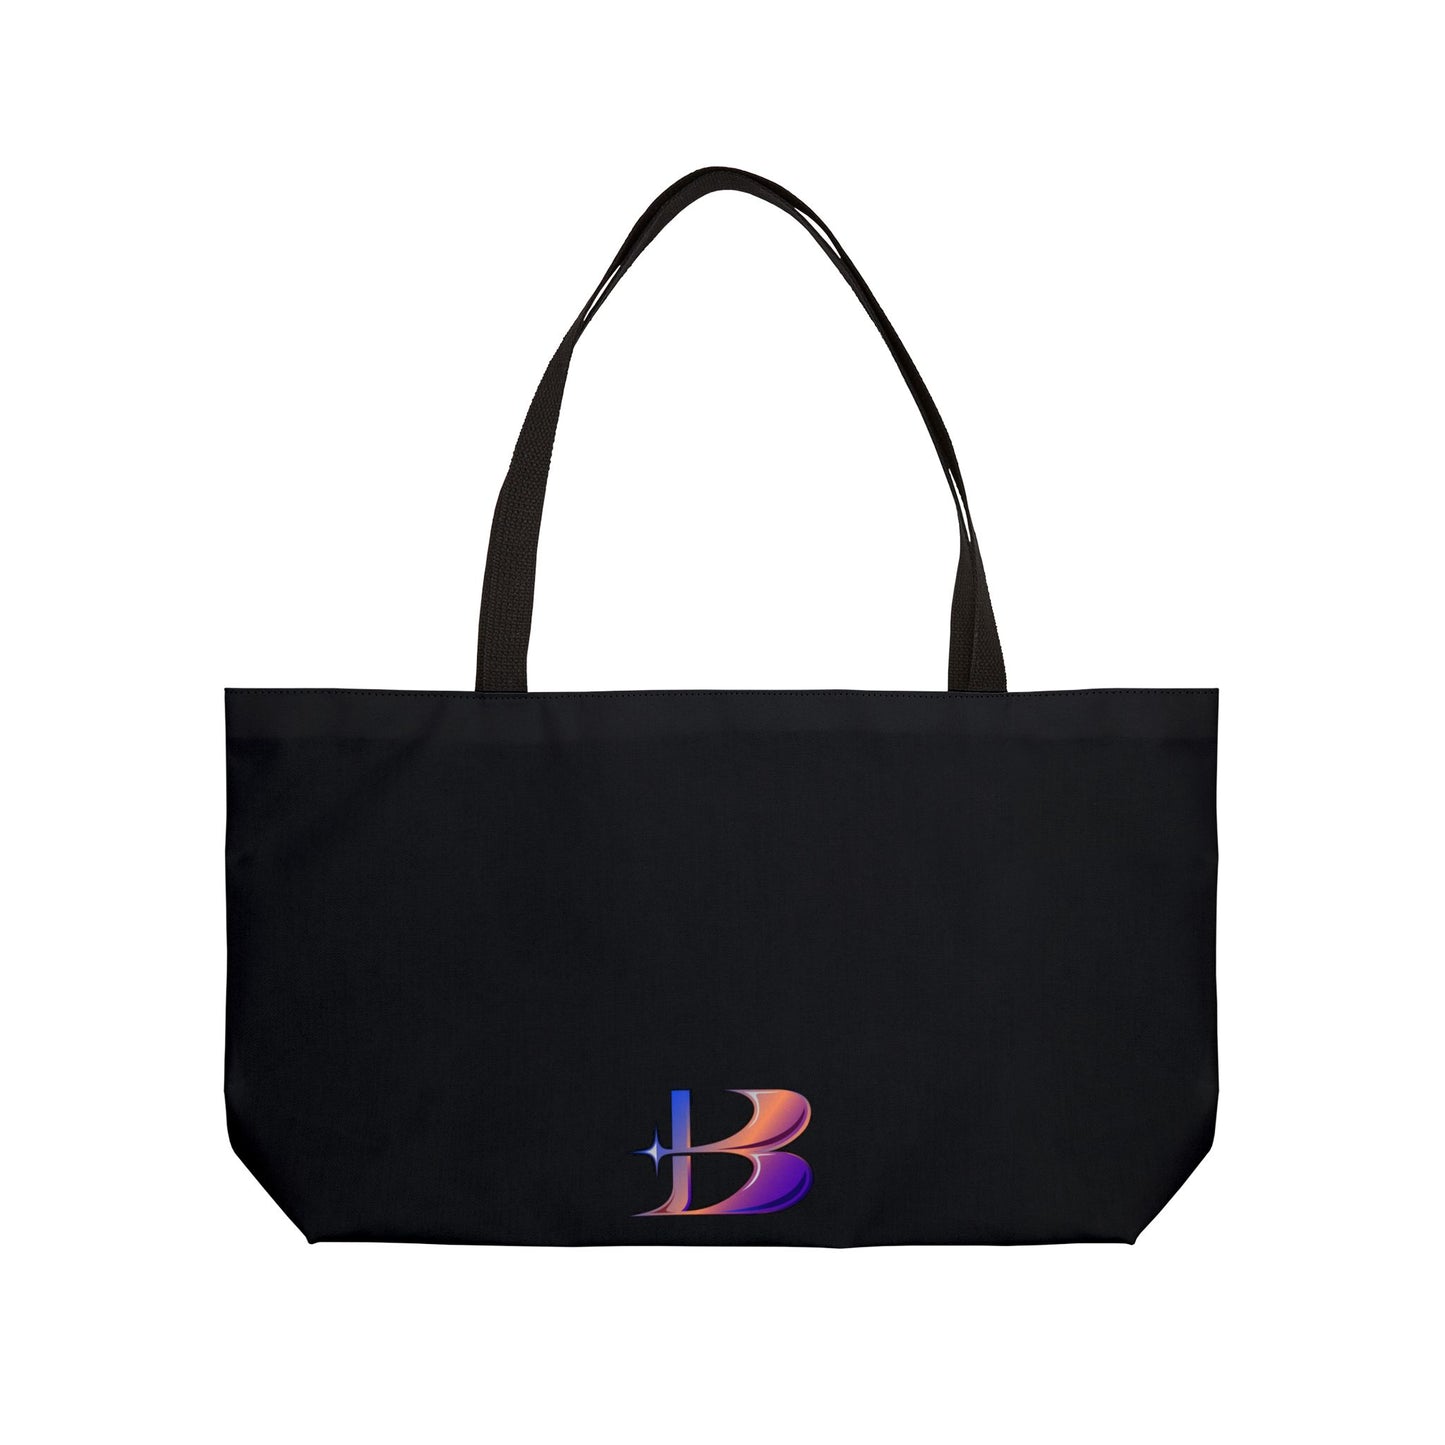 Midnight Bloom Weekender Tote Bag (SP Photography Collection) BLACK